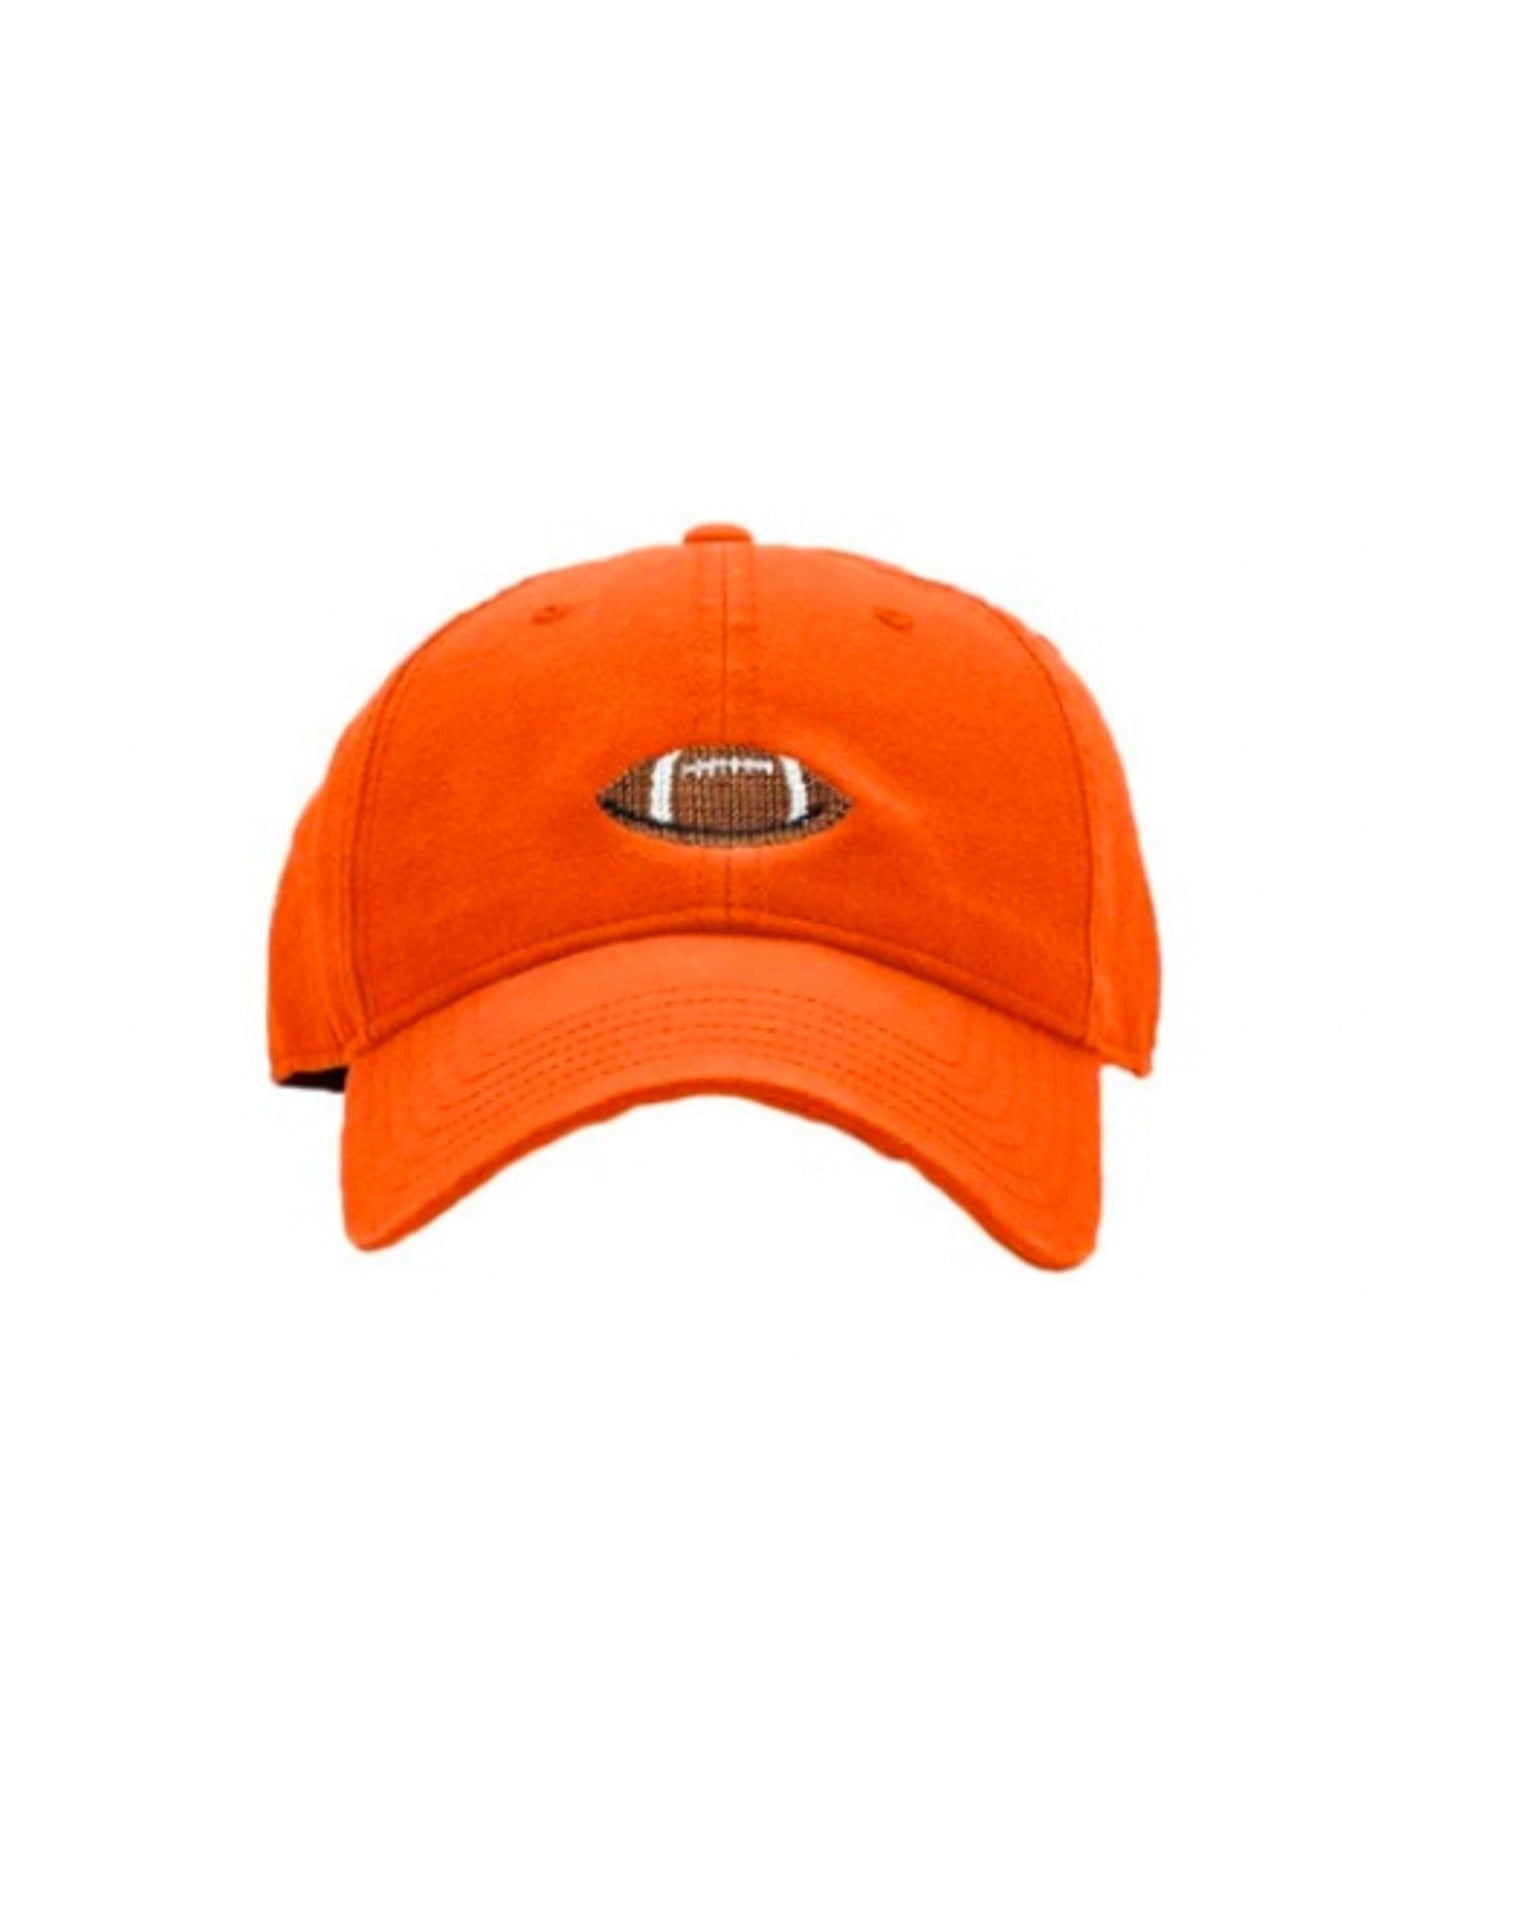 persimmon orange hat with brown and white football